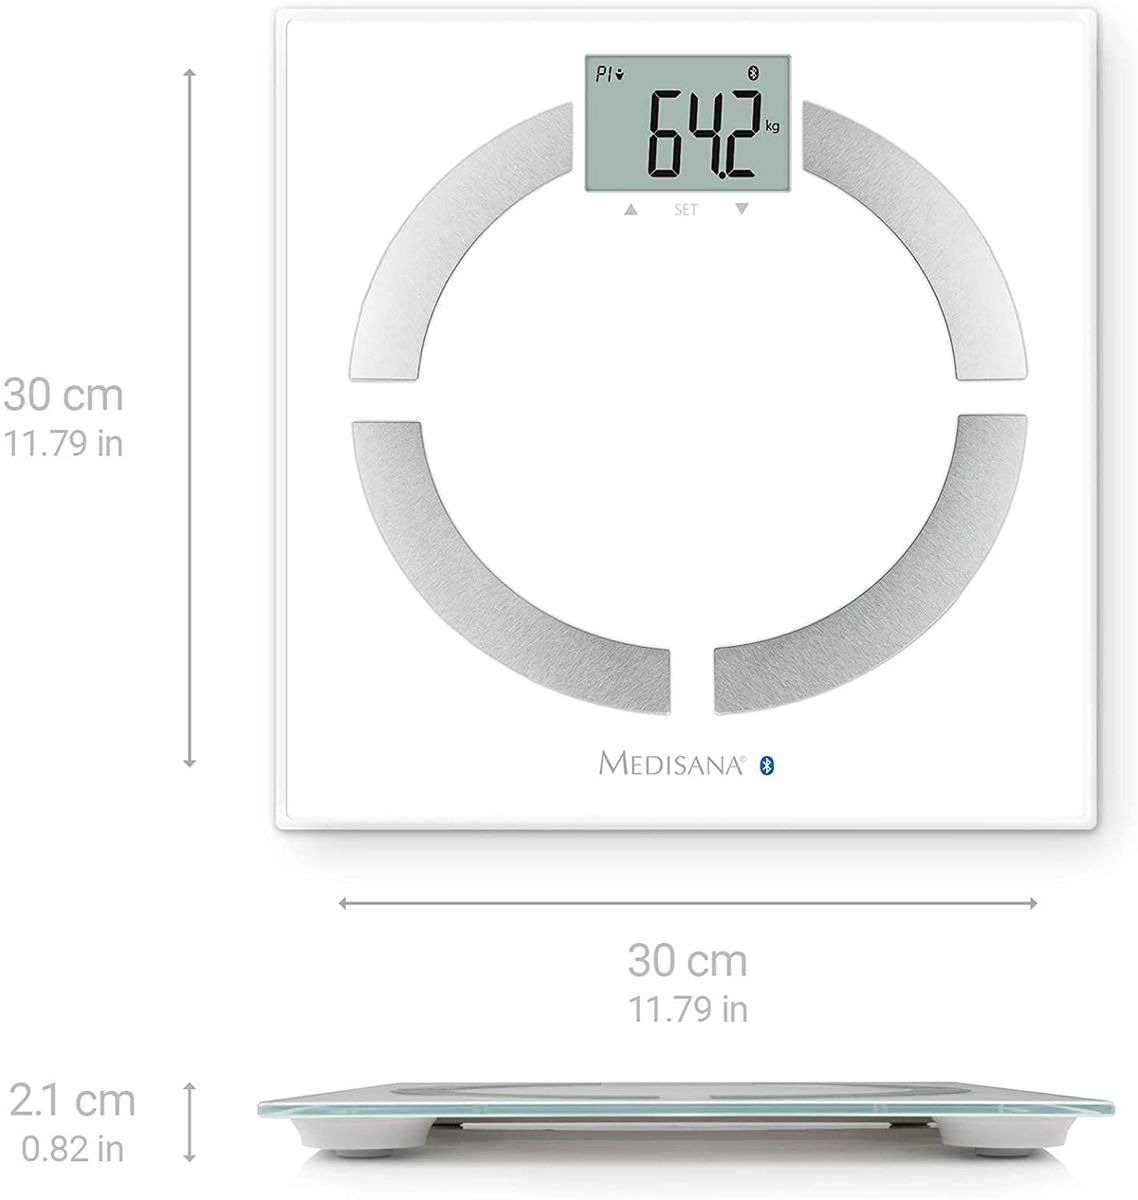 medisana BS 444 connect body composition scale 180 kg, personal scale for measuring body fat, body water, muscle mass and bone weight with Bluetooth and analysis app without e-book